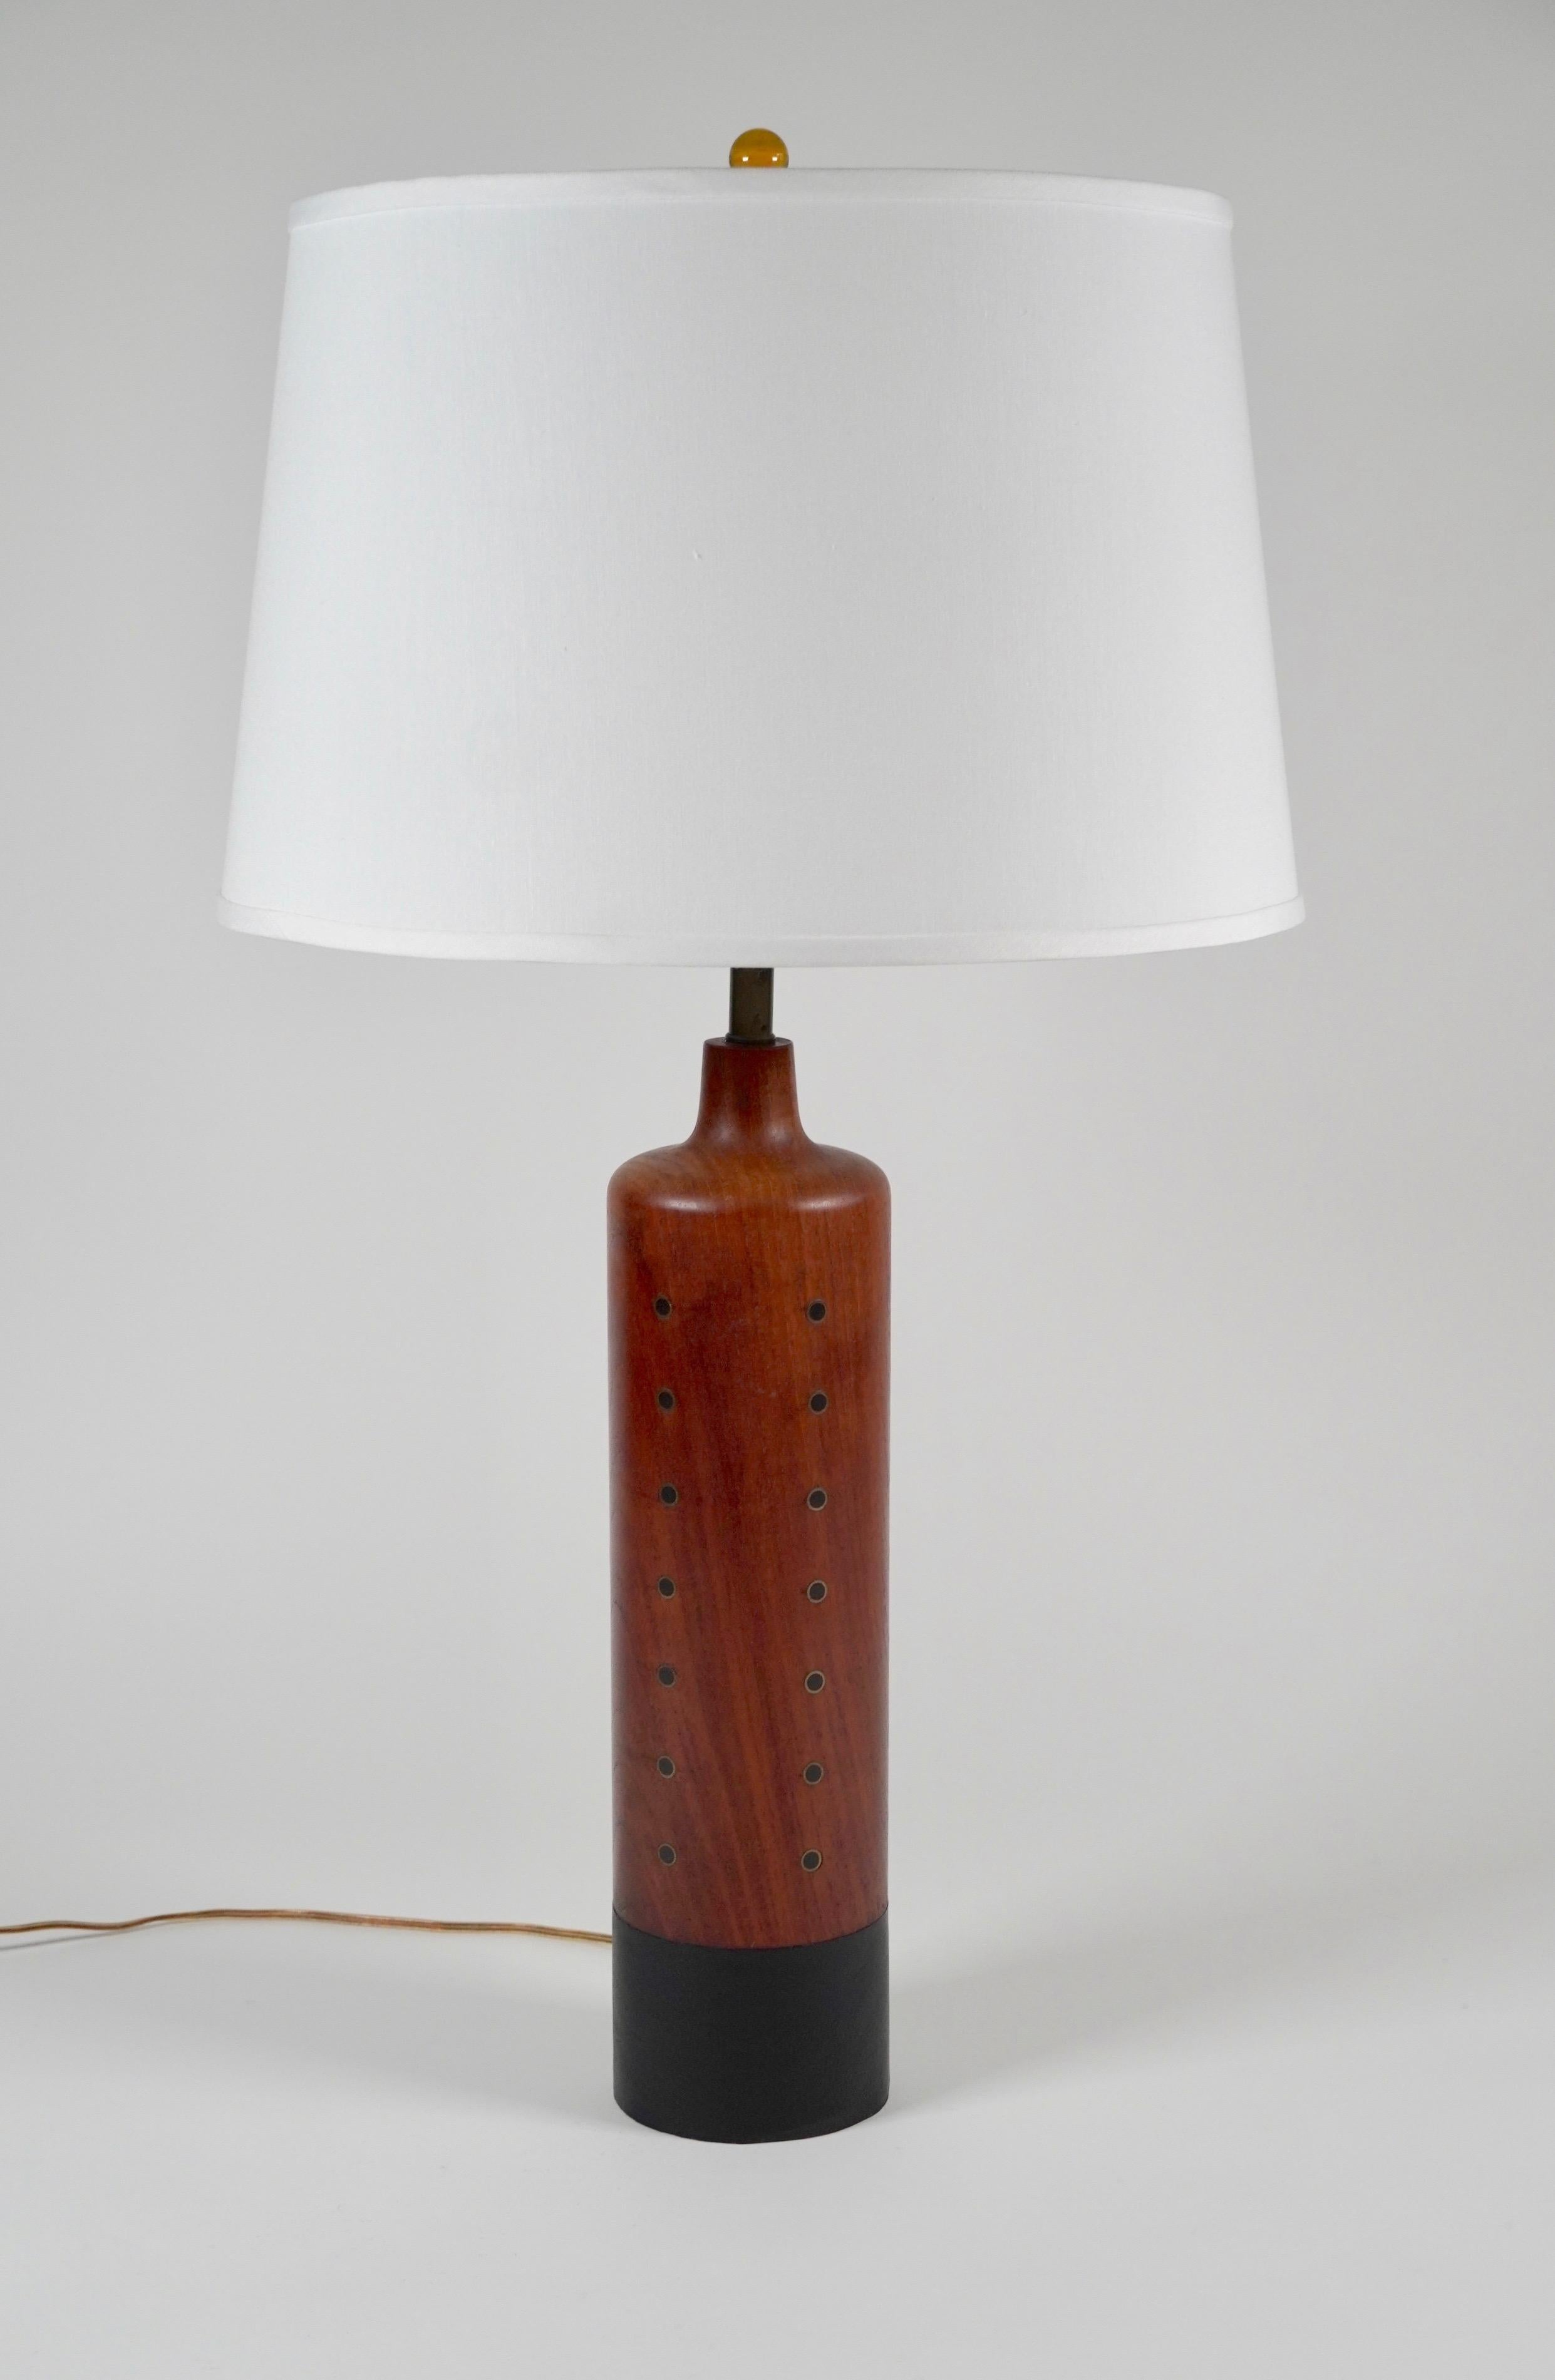 Turned solid teak table lamp with brass and ebony inlay and a leather wrapped base. Created by H. Passke of Denmark circa 1960s with an rich color to the teak and a soft patina to the brass. Marked on the bottom of base H. Passke Denmark.